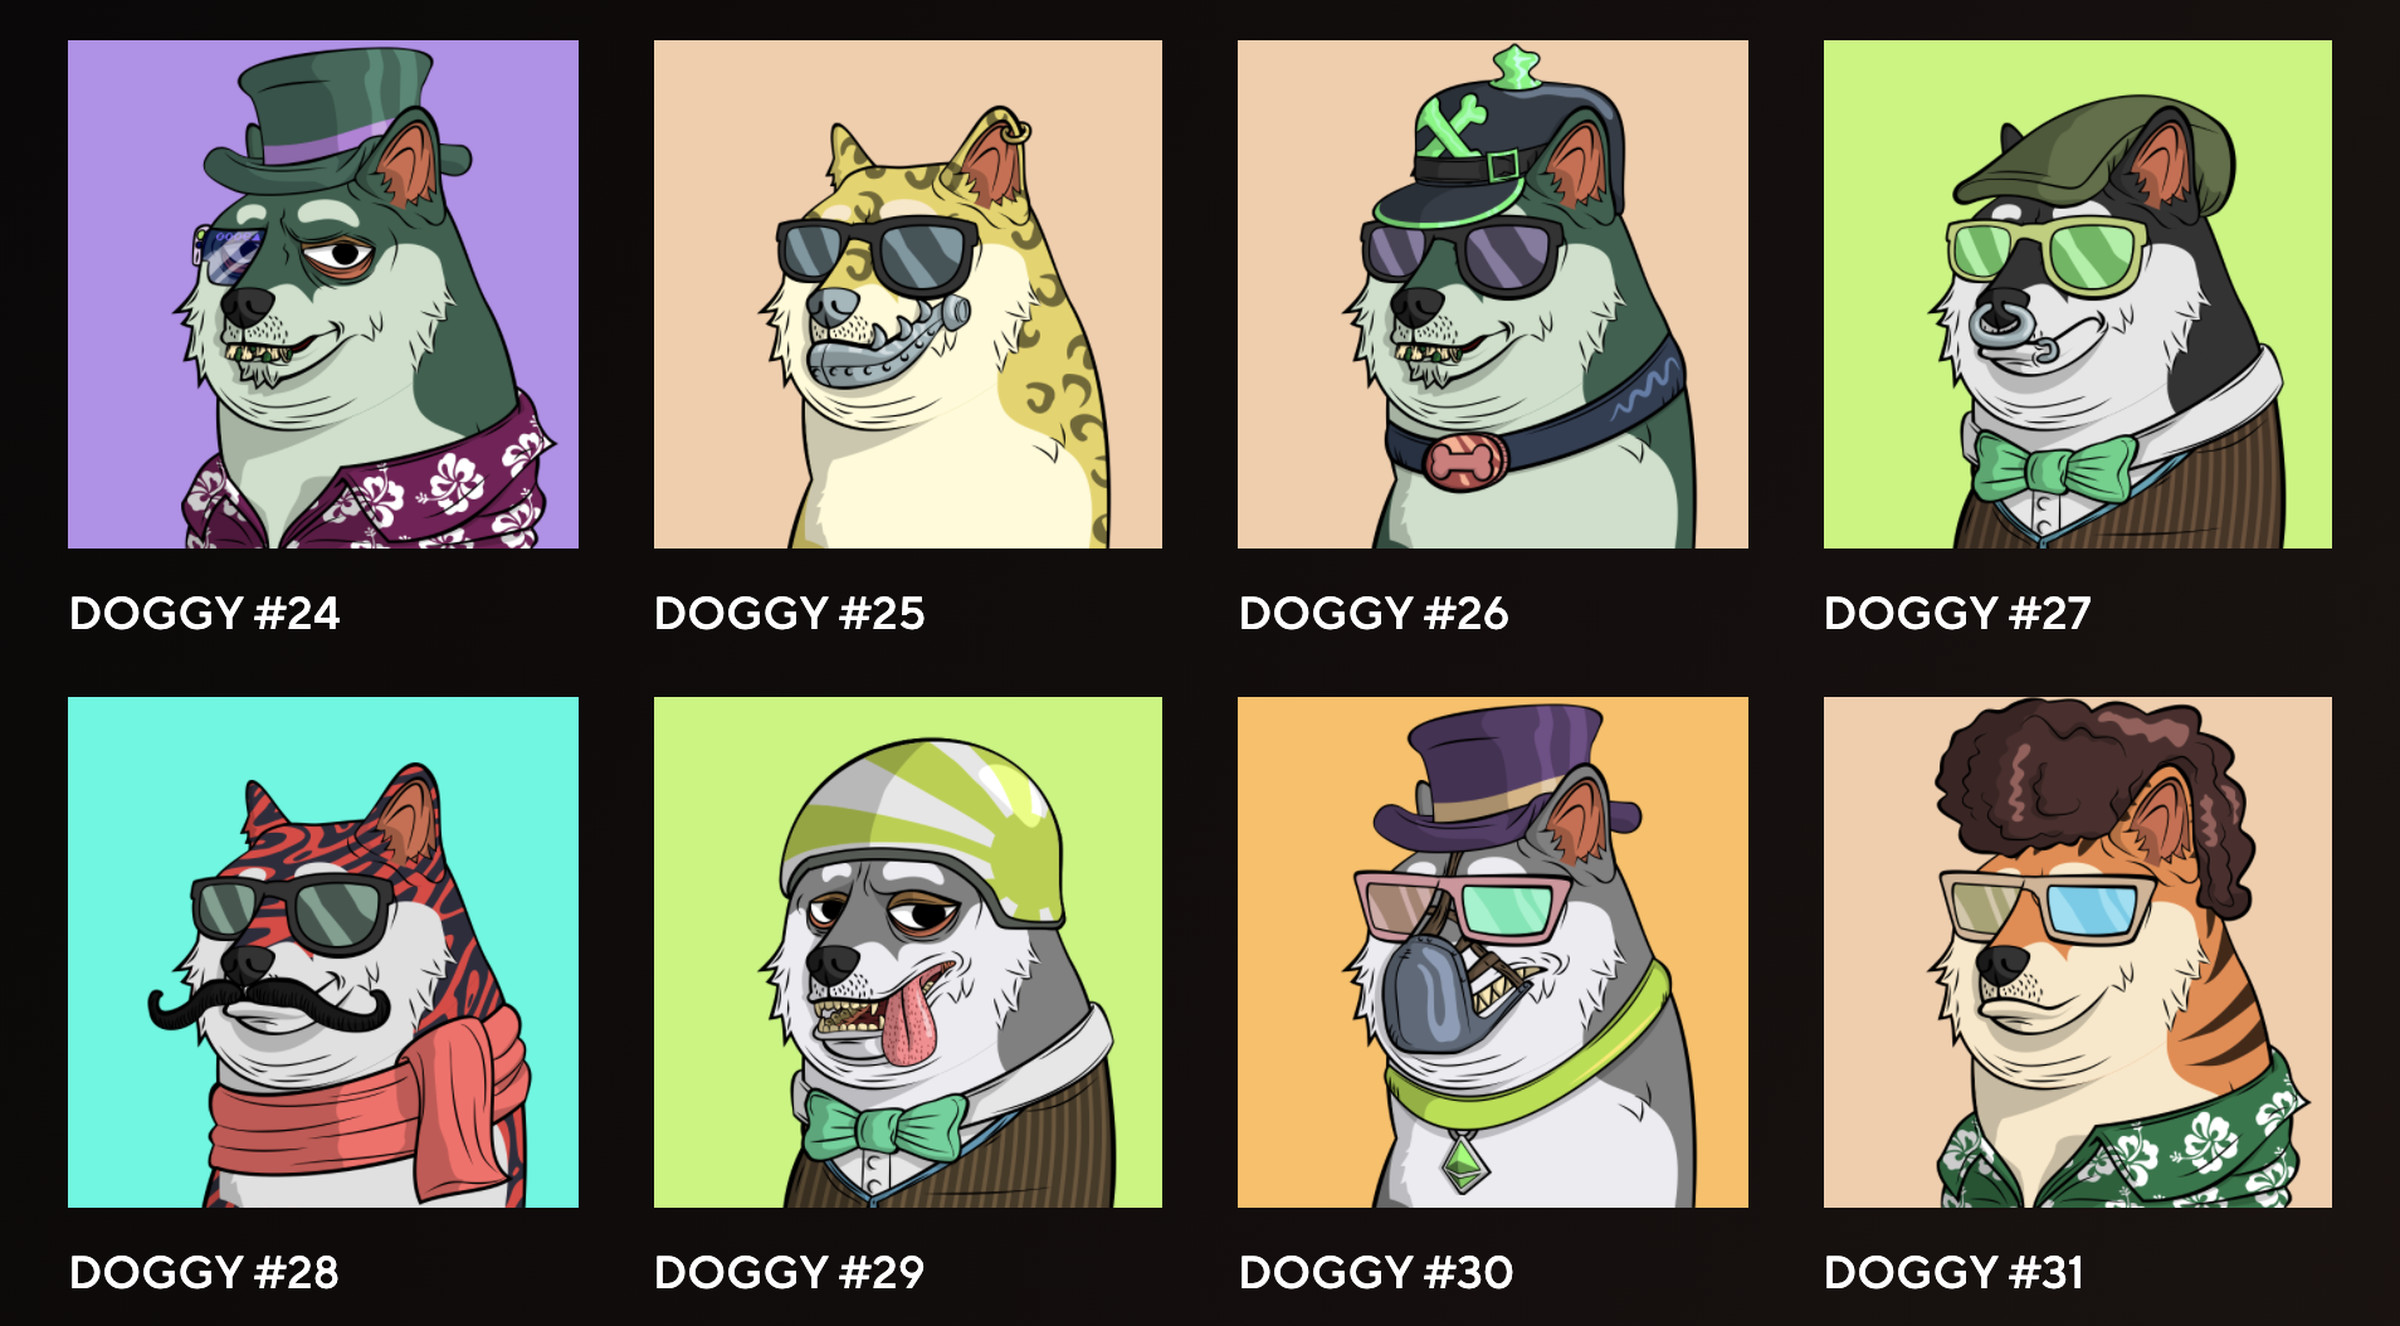 Eight dogs wearing different accessories. One has a monocle, others have sunglasses, one has a bowtie.